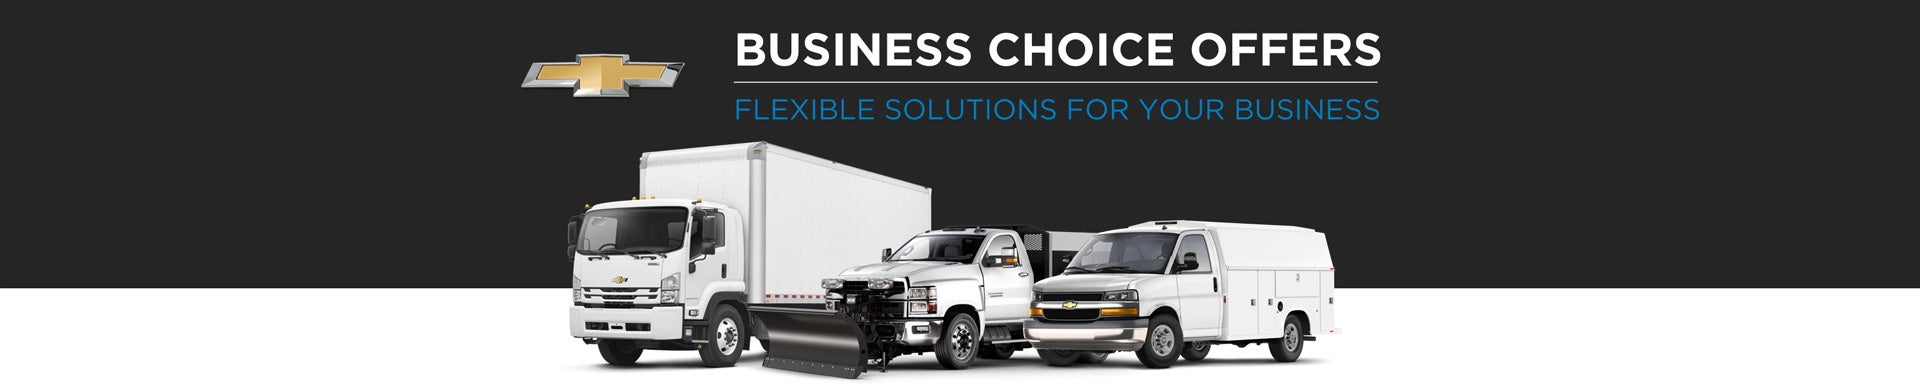 Chevrolet Business Choice Offers - Flexible Solutions for your Business - Golf Mill Chevrolet in Niles IL